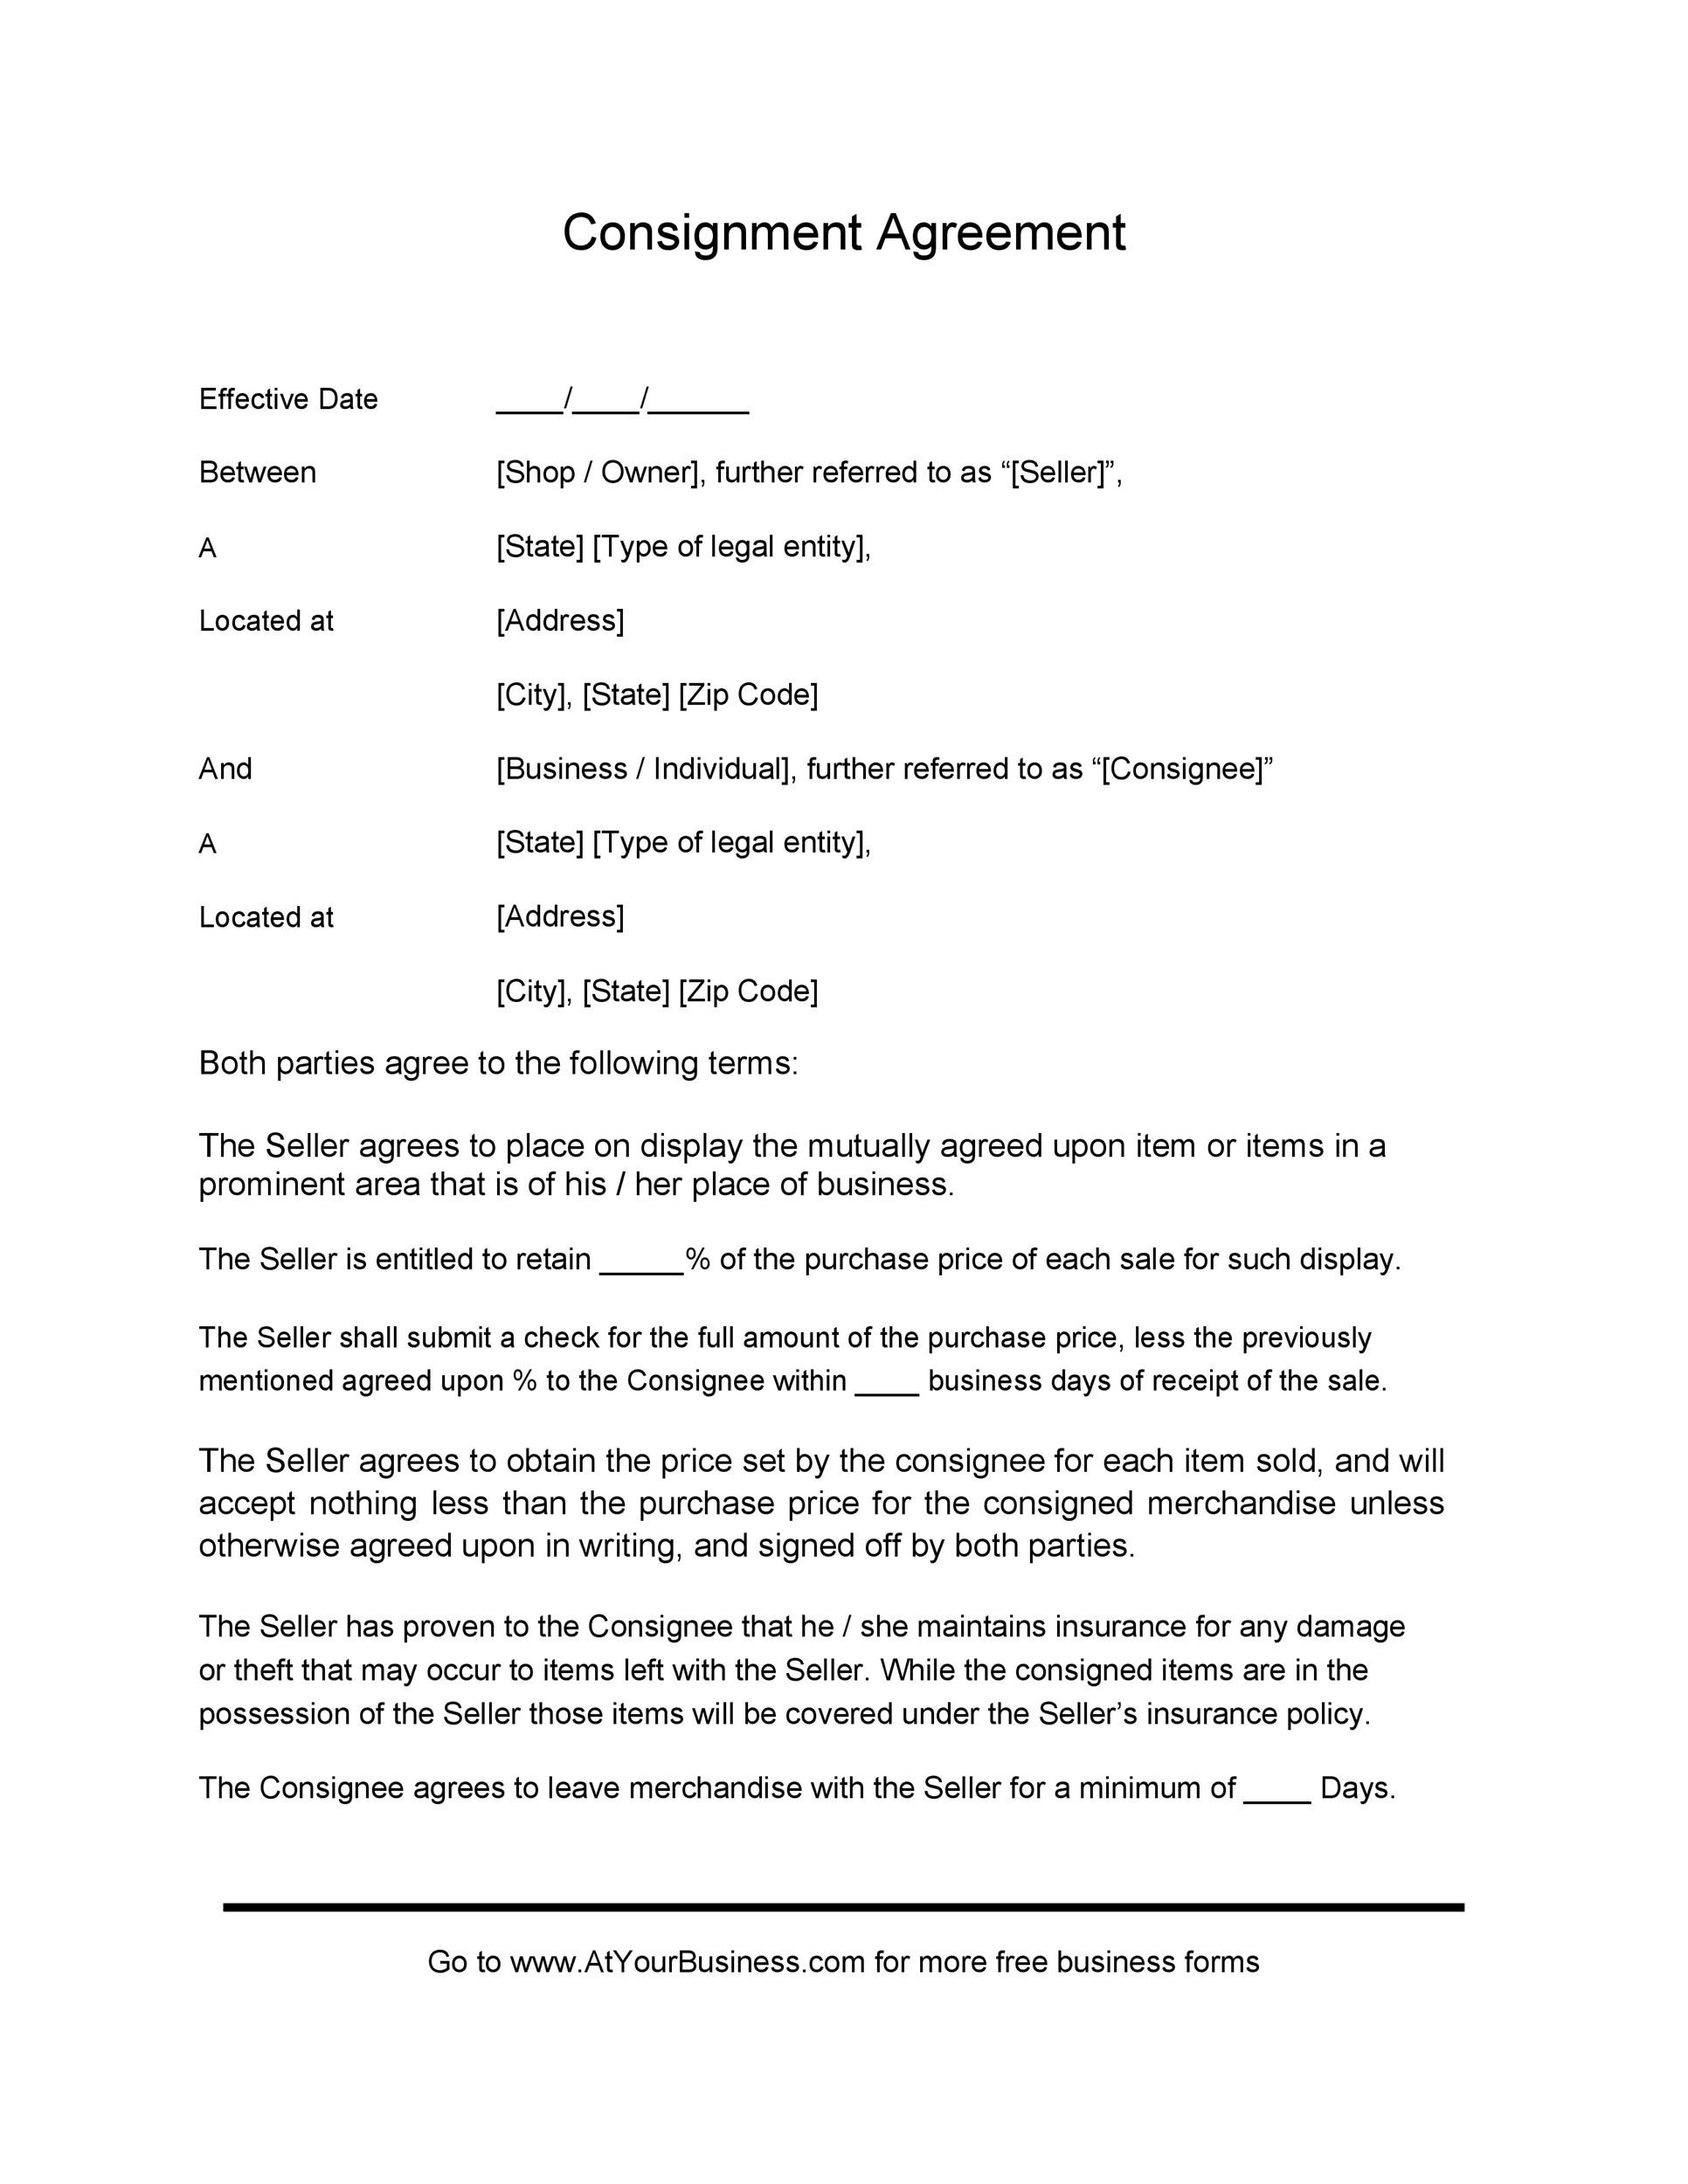 Consignment Agreement Templates 14 Free Word Excel PDF Formats 